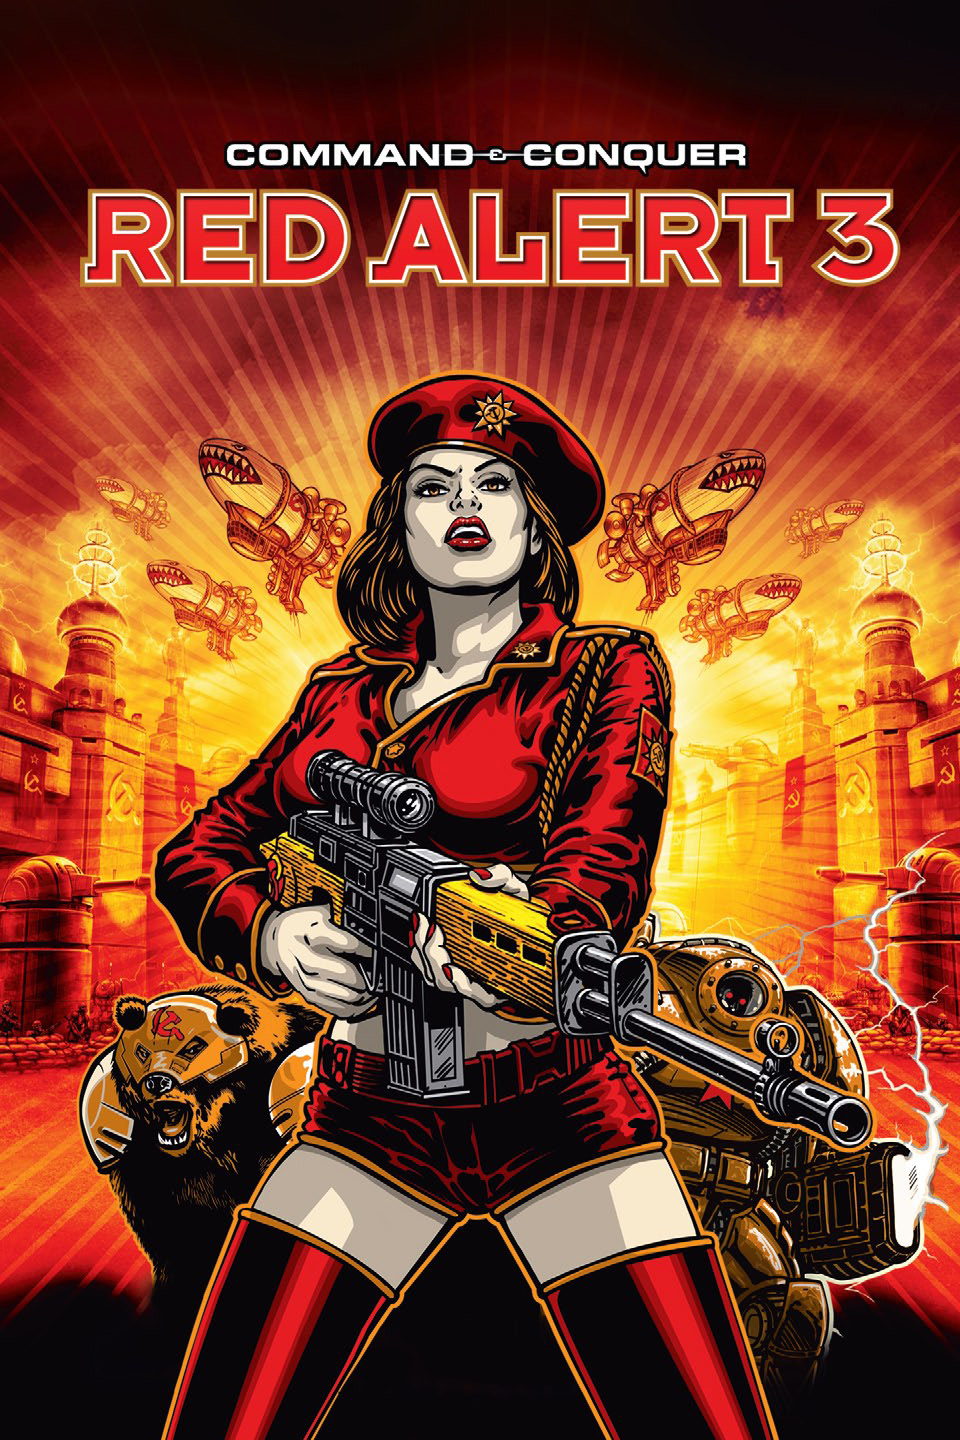 Command & Conquer: Red Alert 3 manual - Command & Conquer Wiki covering Tiberium, Red Alert and Generals universes